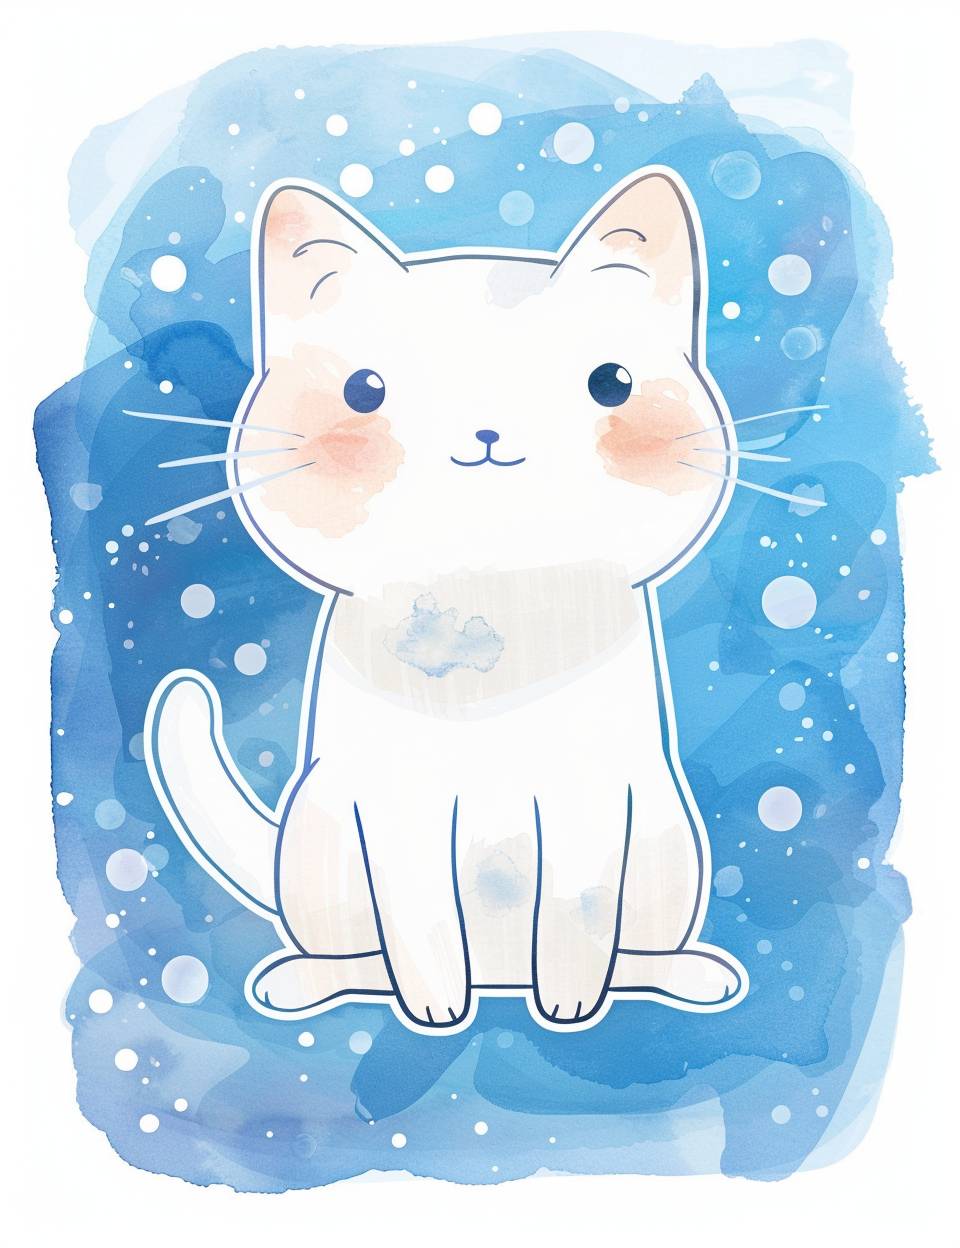 A cute cartoon white cat with a blue watercolor background sticker, a simple flat illustration in the style of Henri Matisse and Ryo Takemasa.